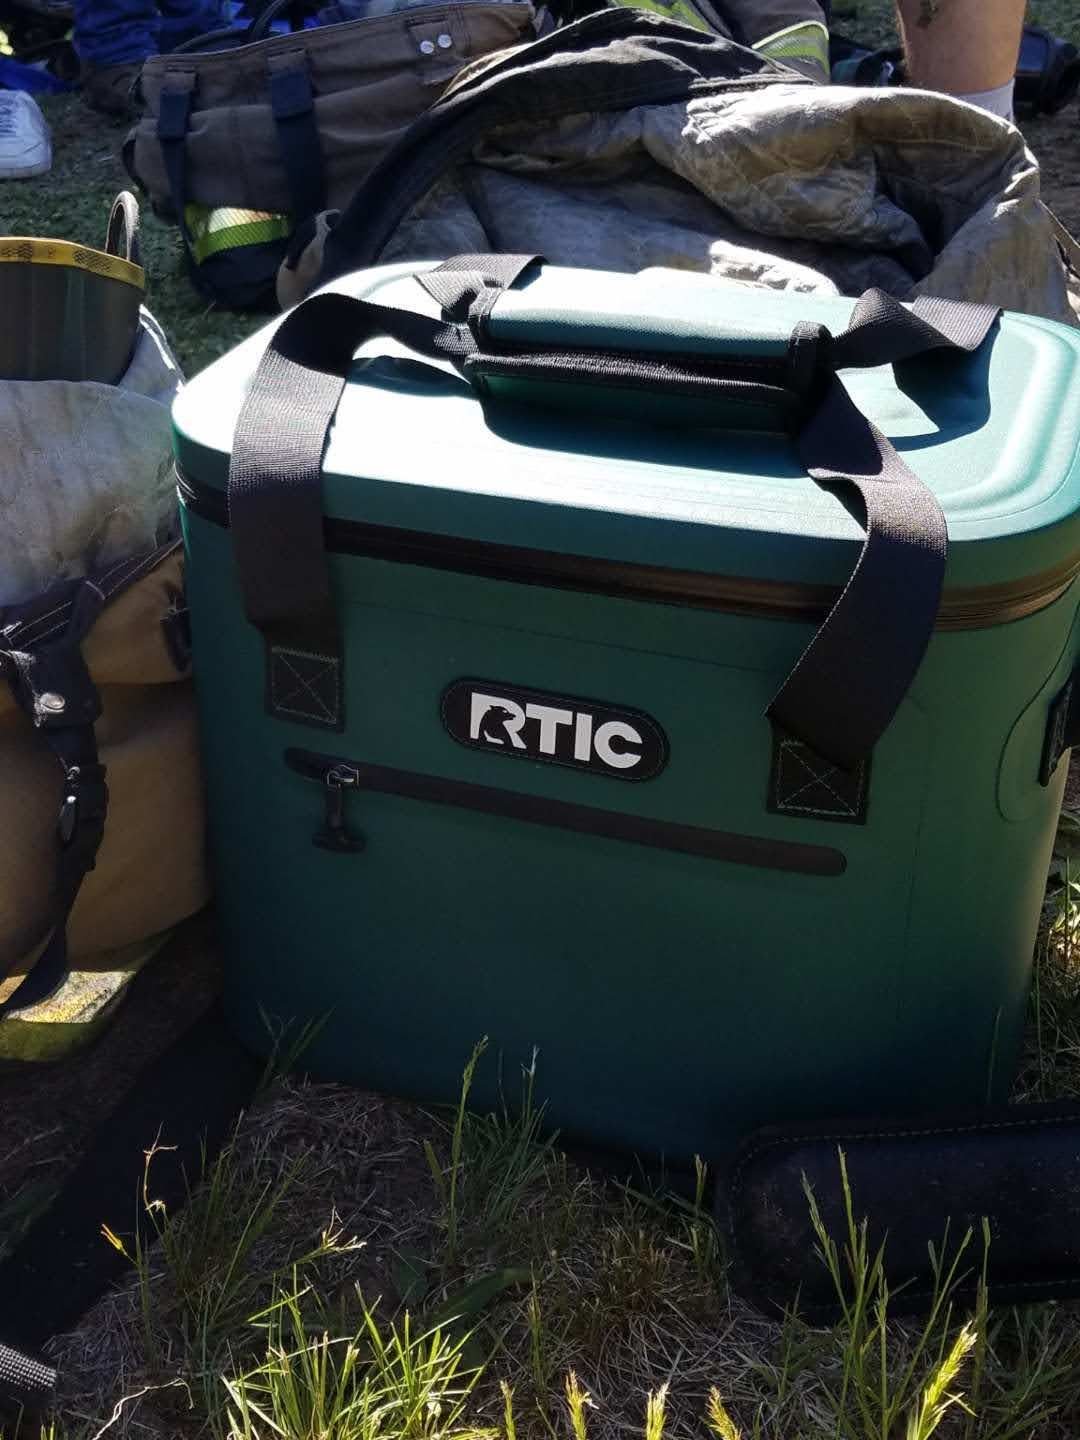 RTIC Soft Cooler 30 Can Review - Is It Worth It? 